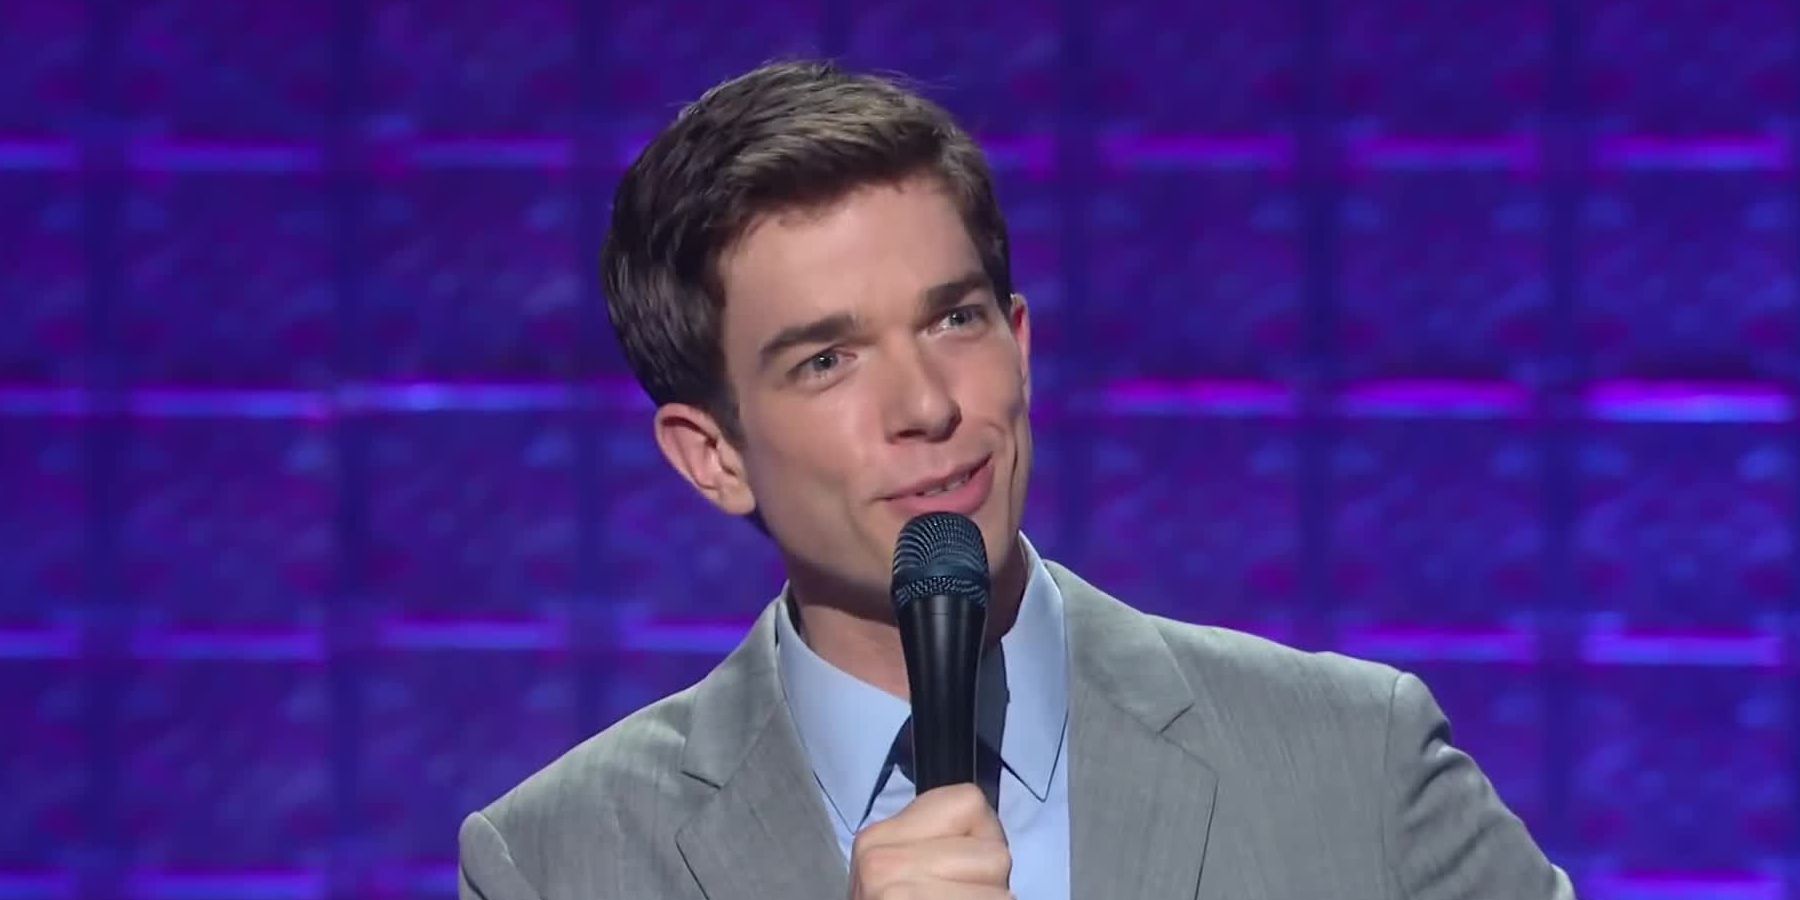 John mulaney makes a funny face in New in Town